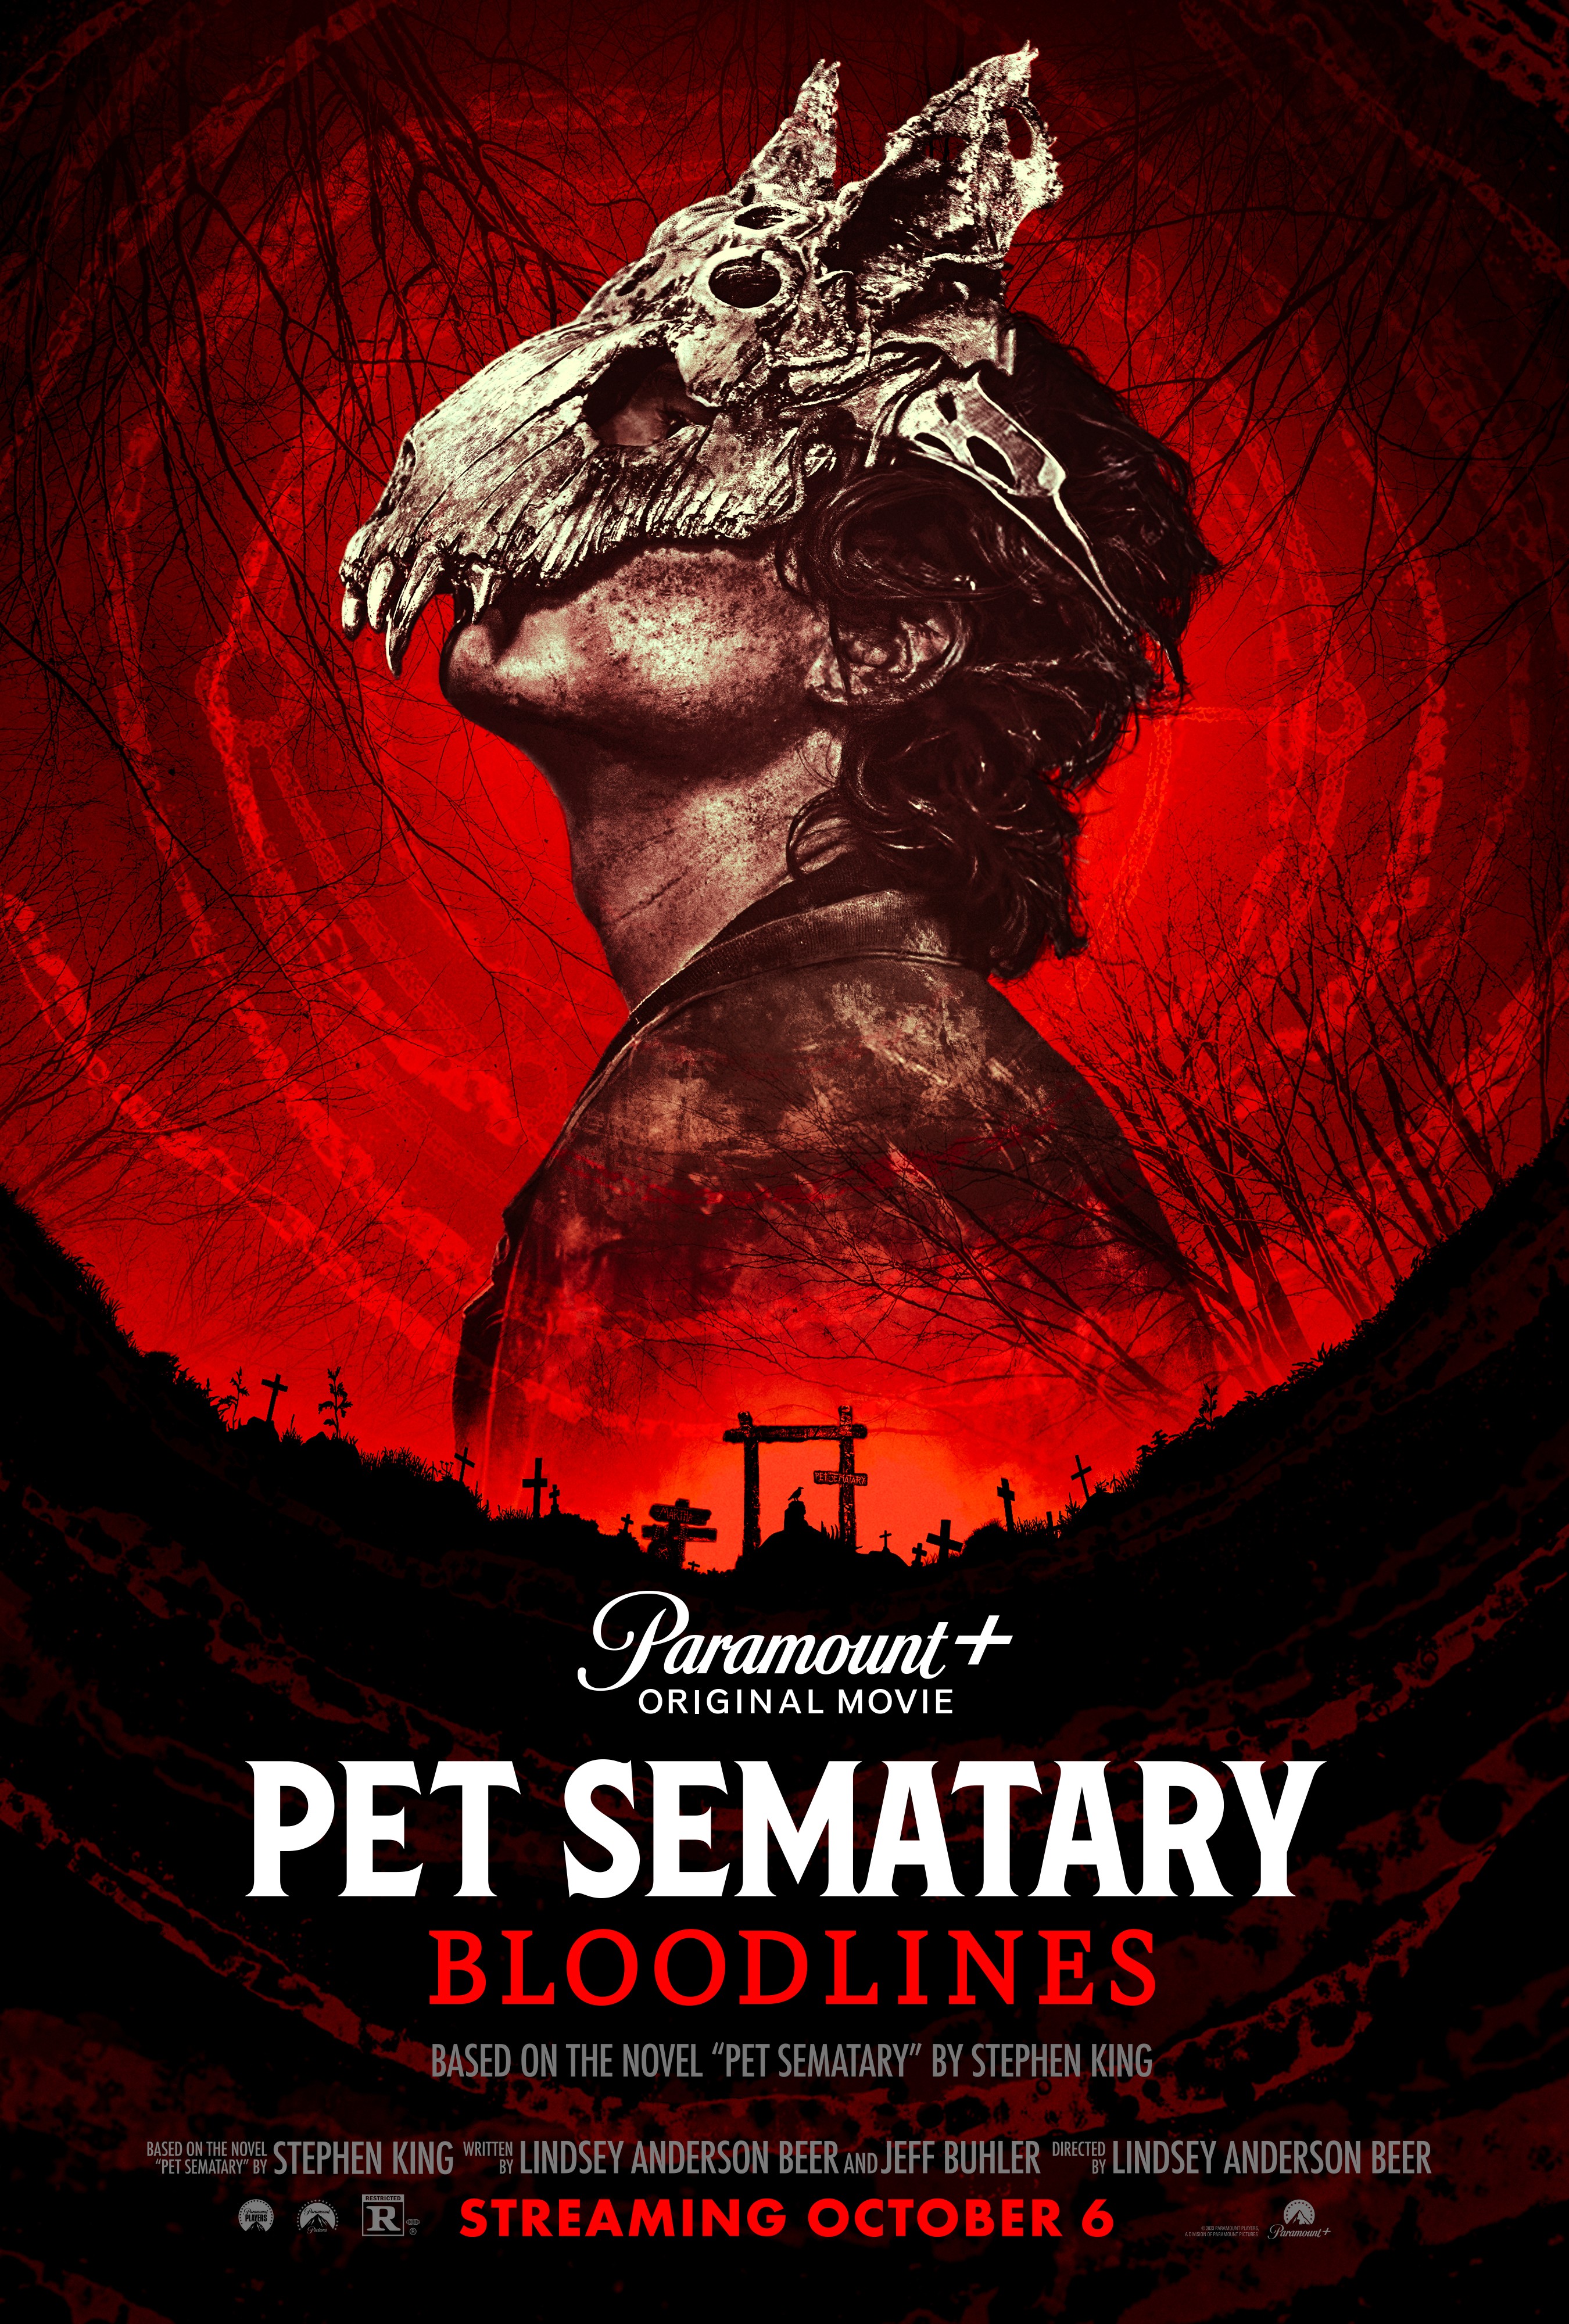 A red and black movie poster for Pet Sematary: Bloodlines, which includes a dark cemetery, spooky tree branches, and a boy wearing an animal skull mask.